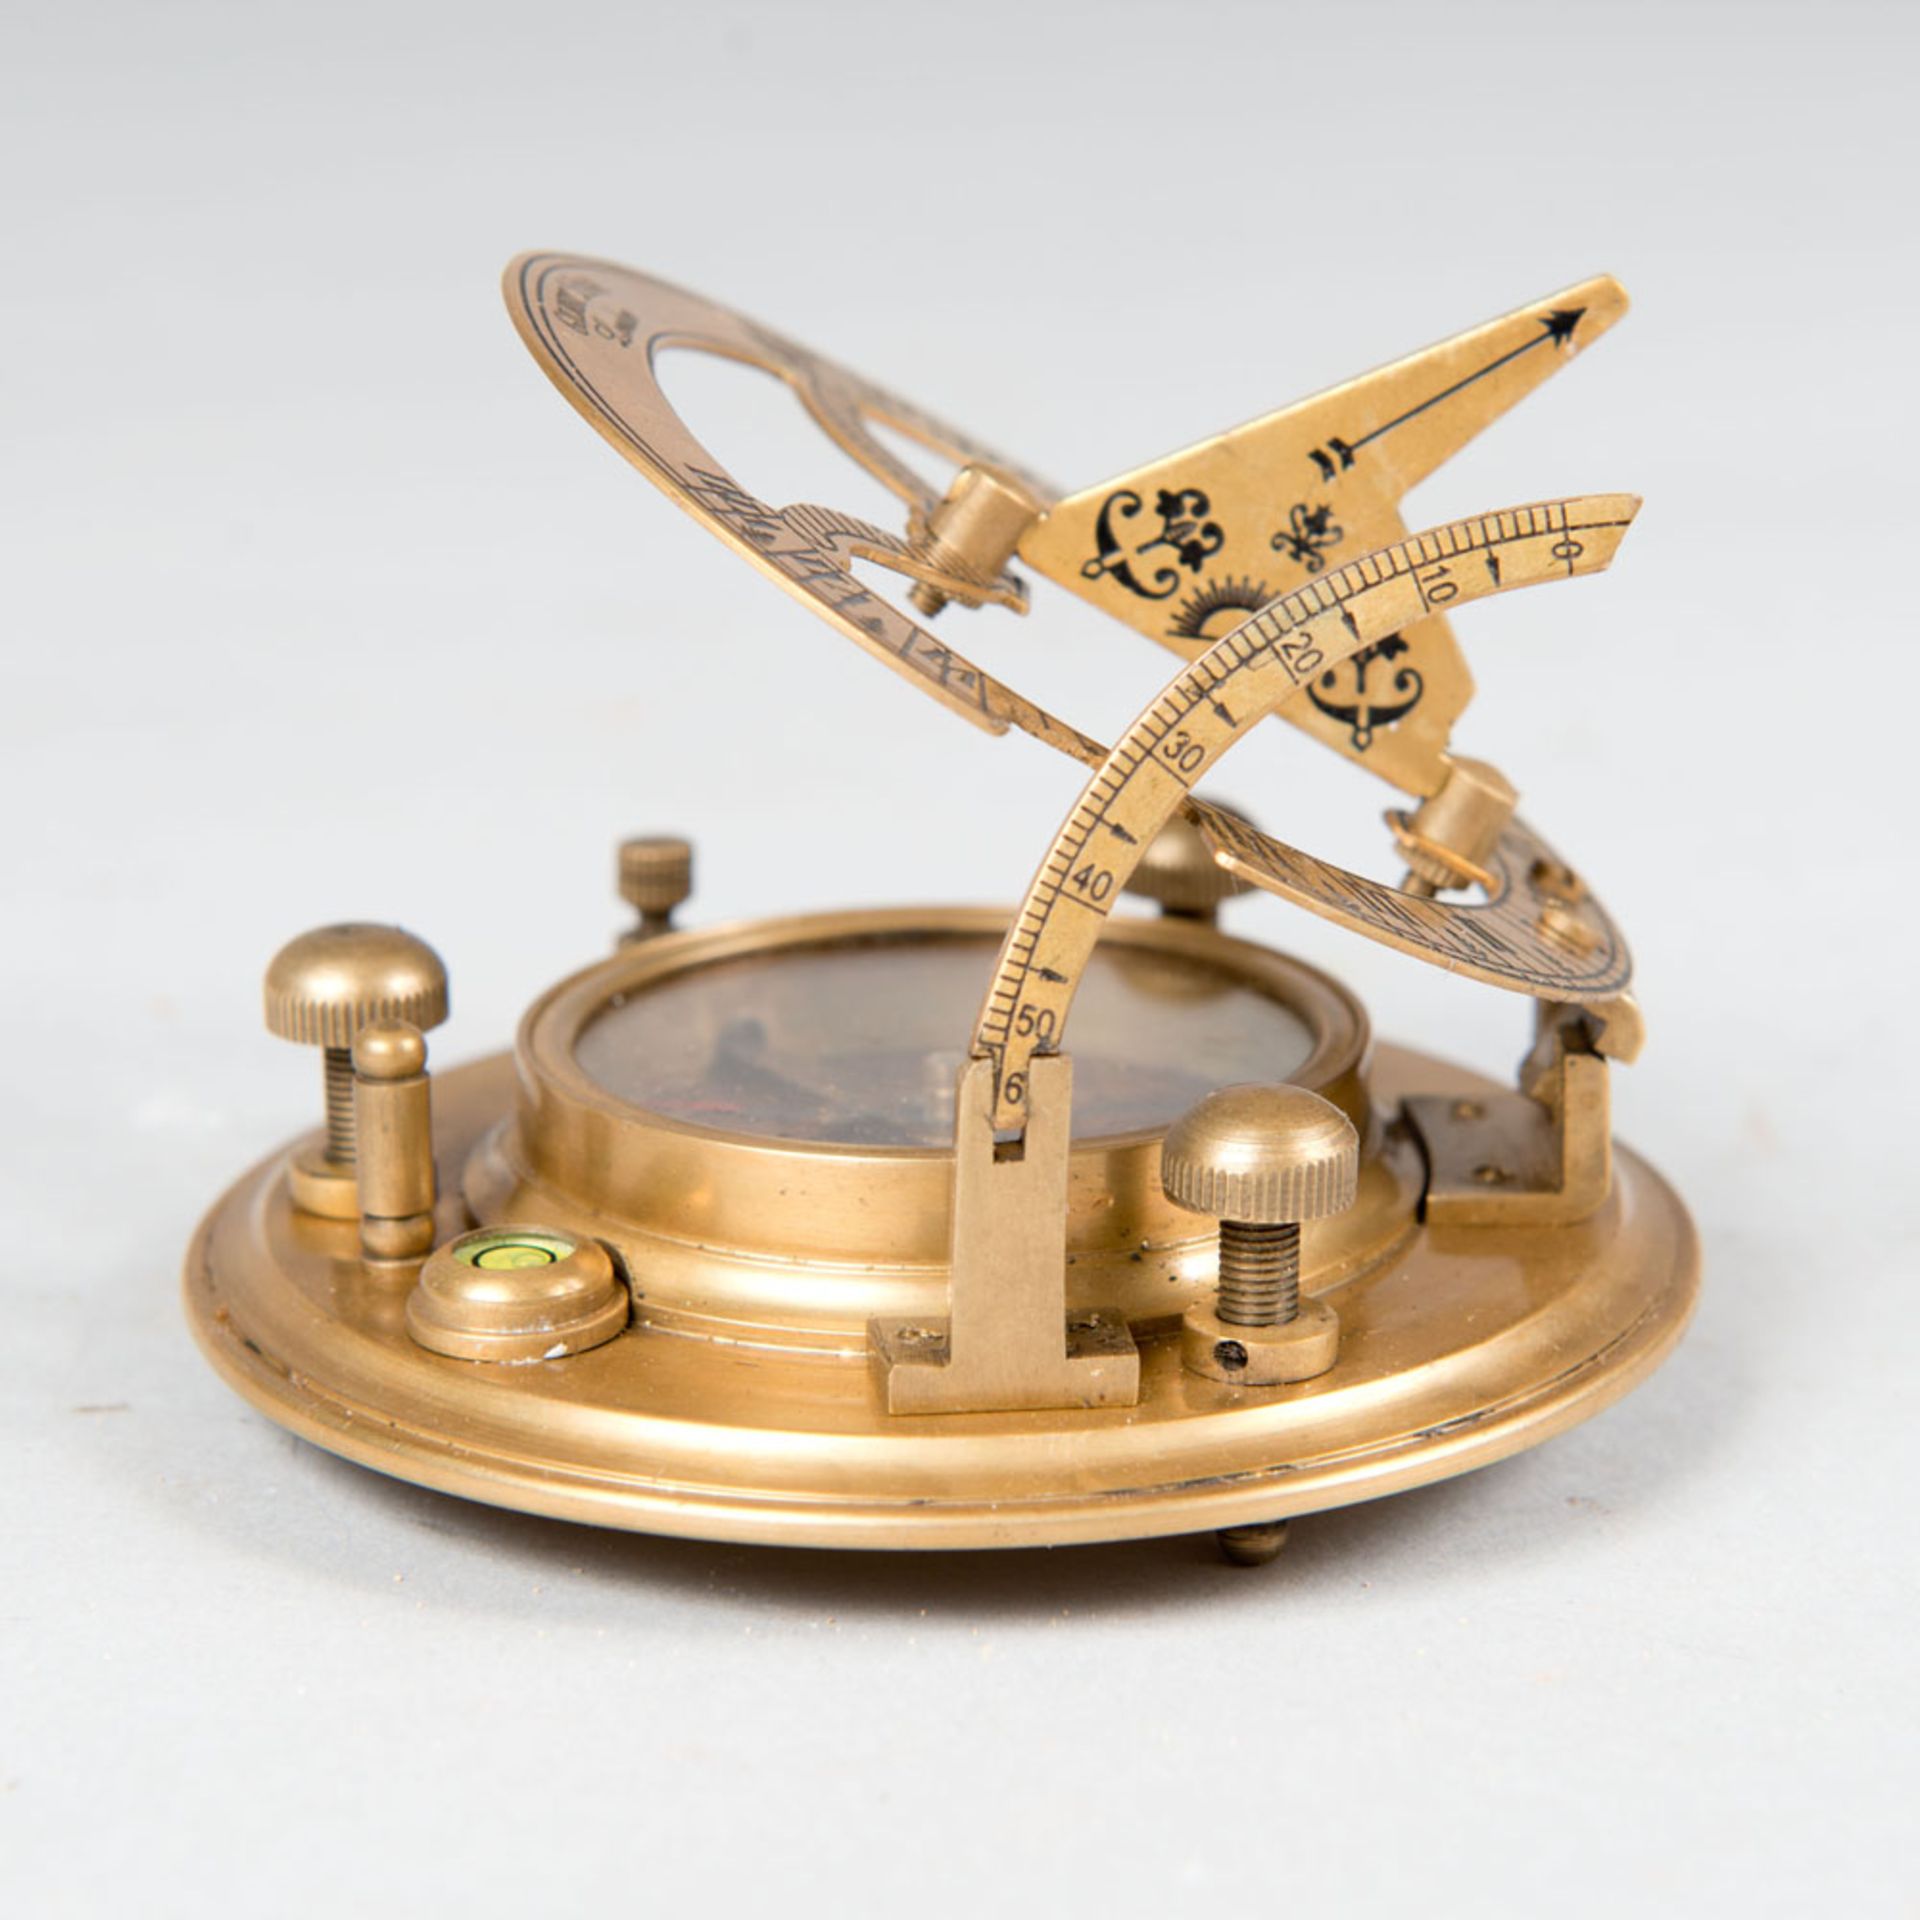 Gilbert and Sons Compass - Image 3 of 3